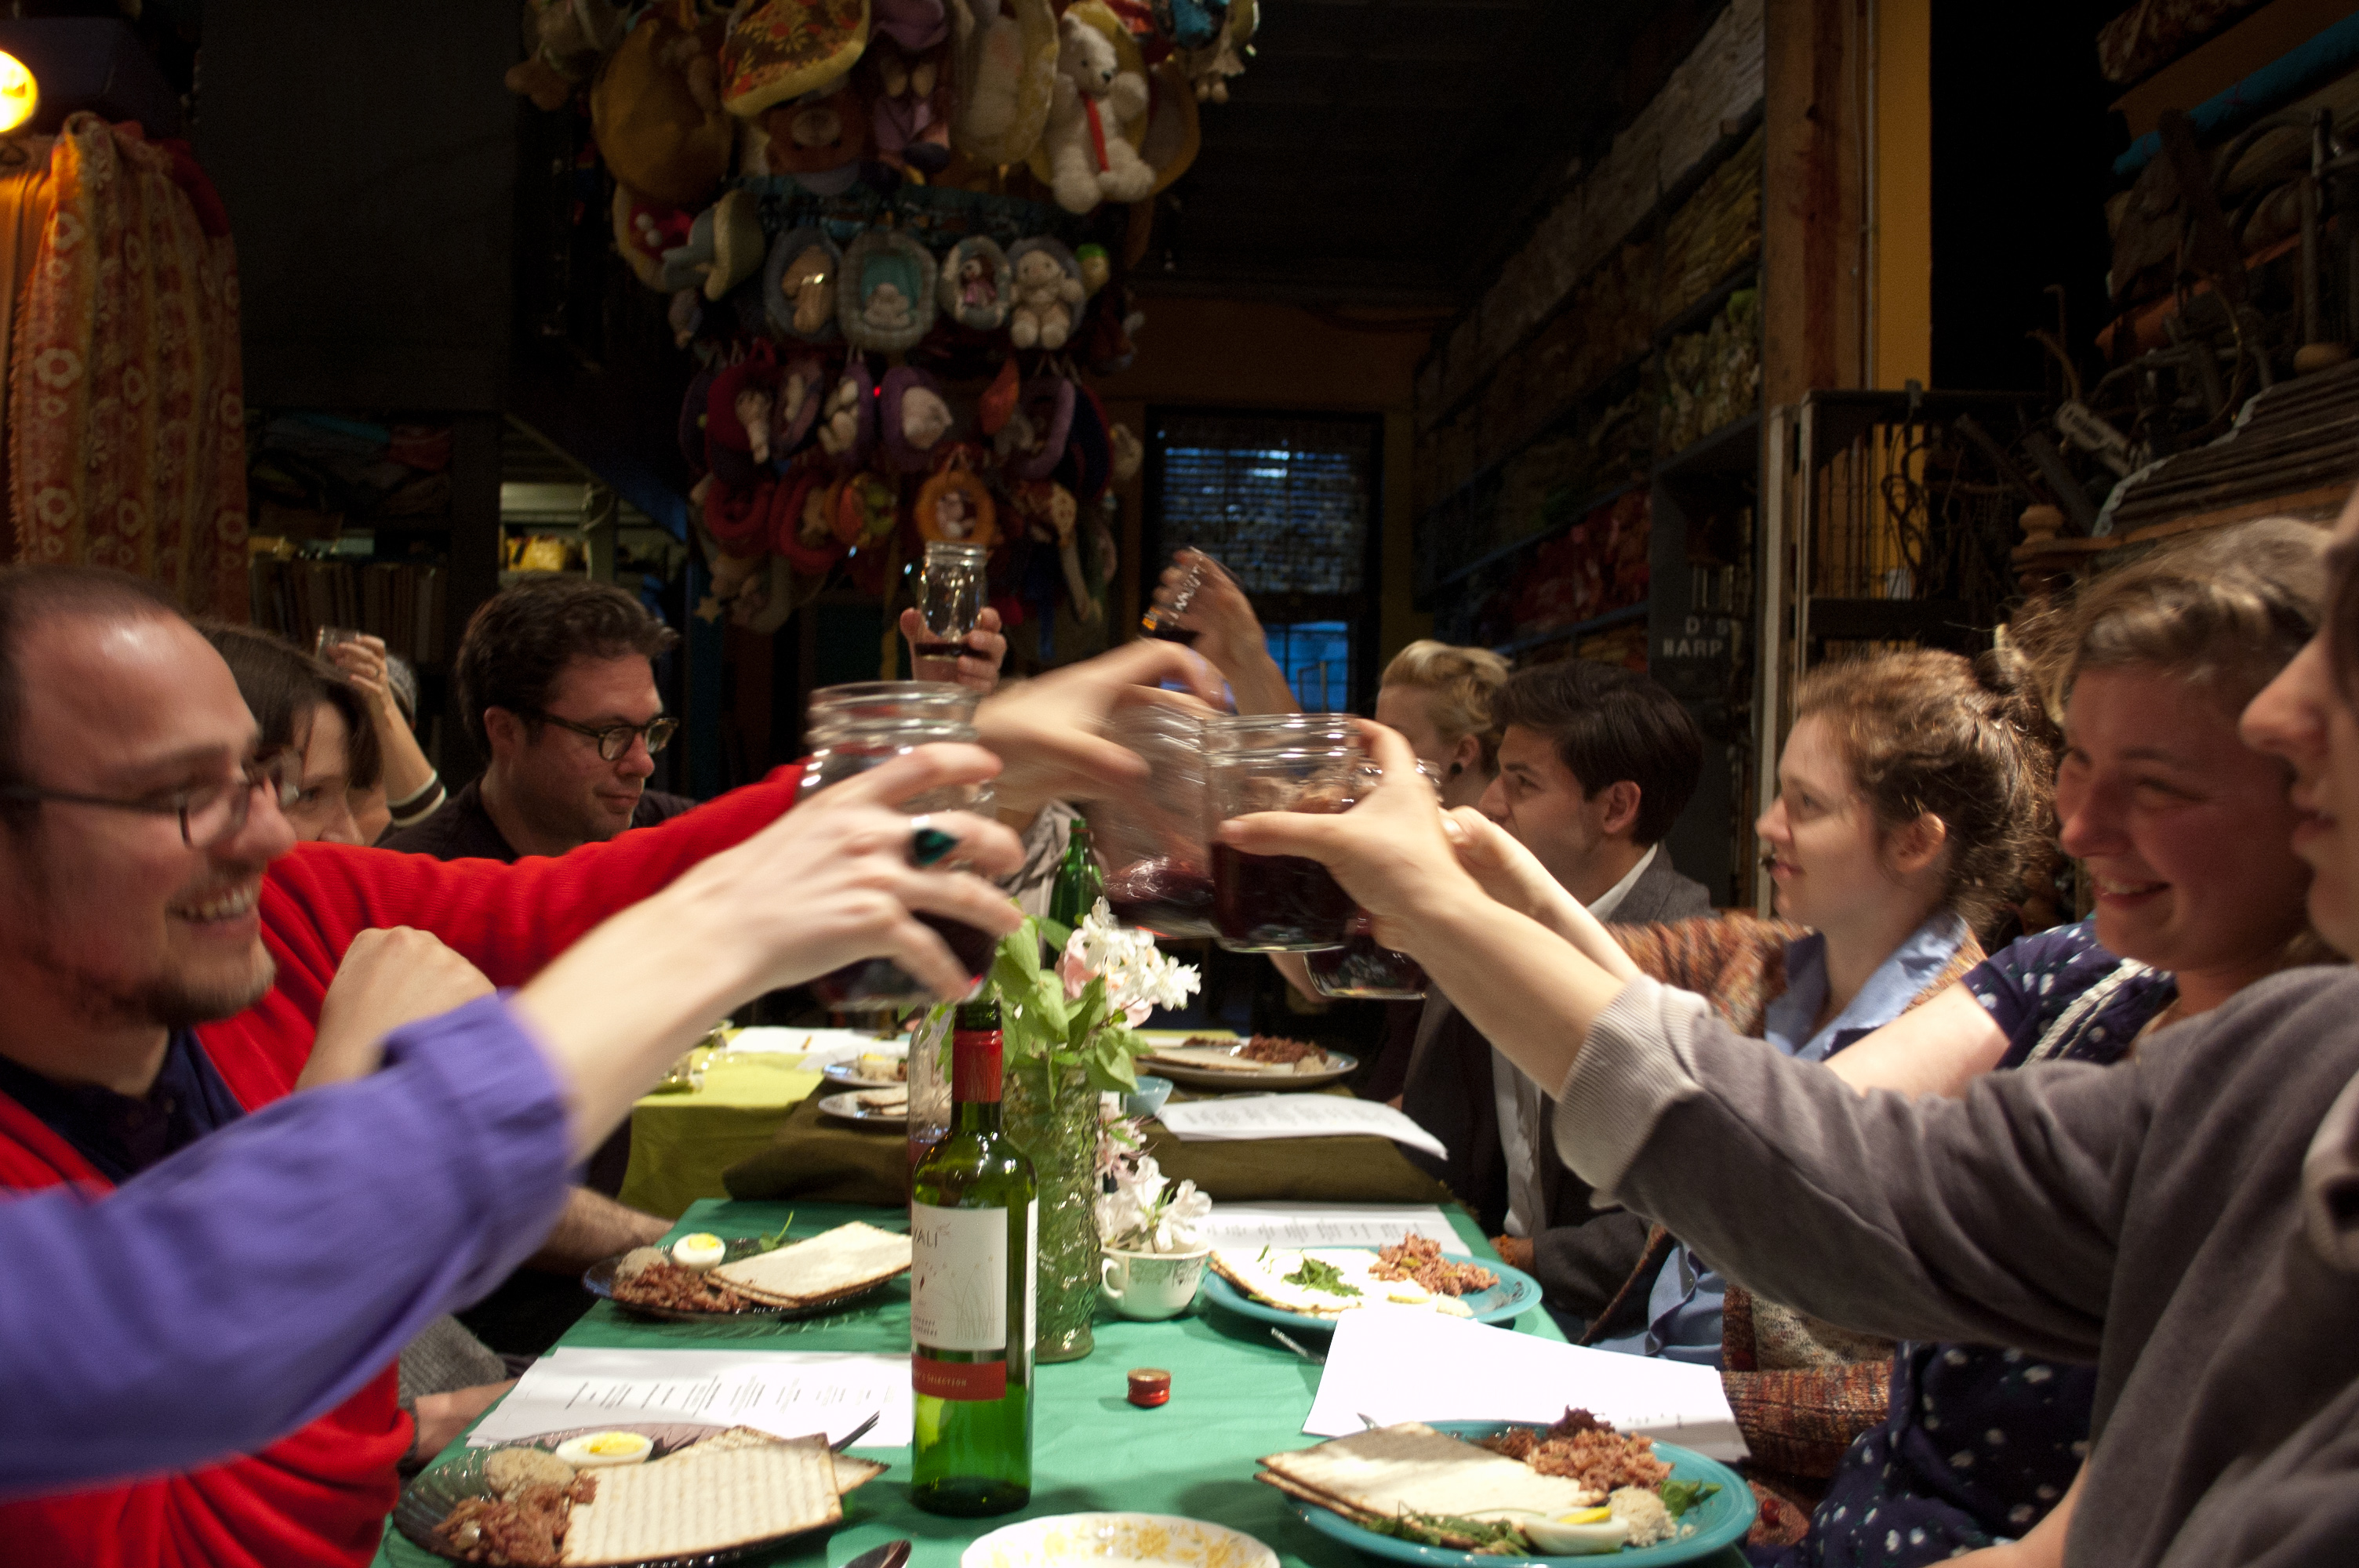 Elsewhere Seder: Occupy Passover